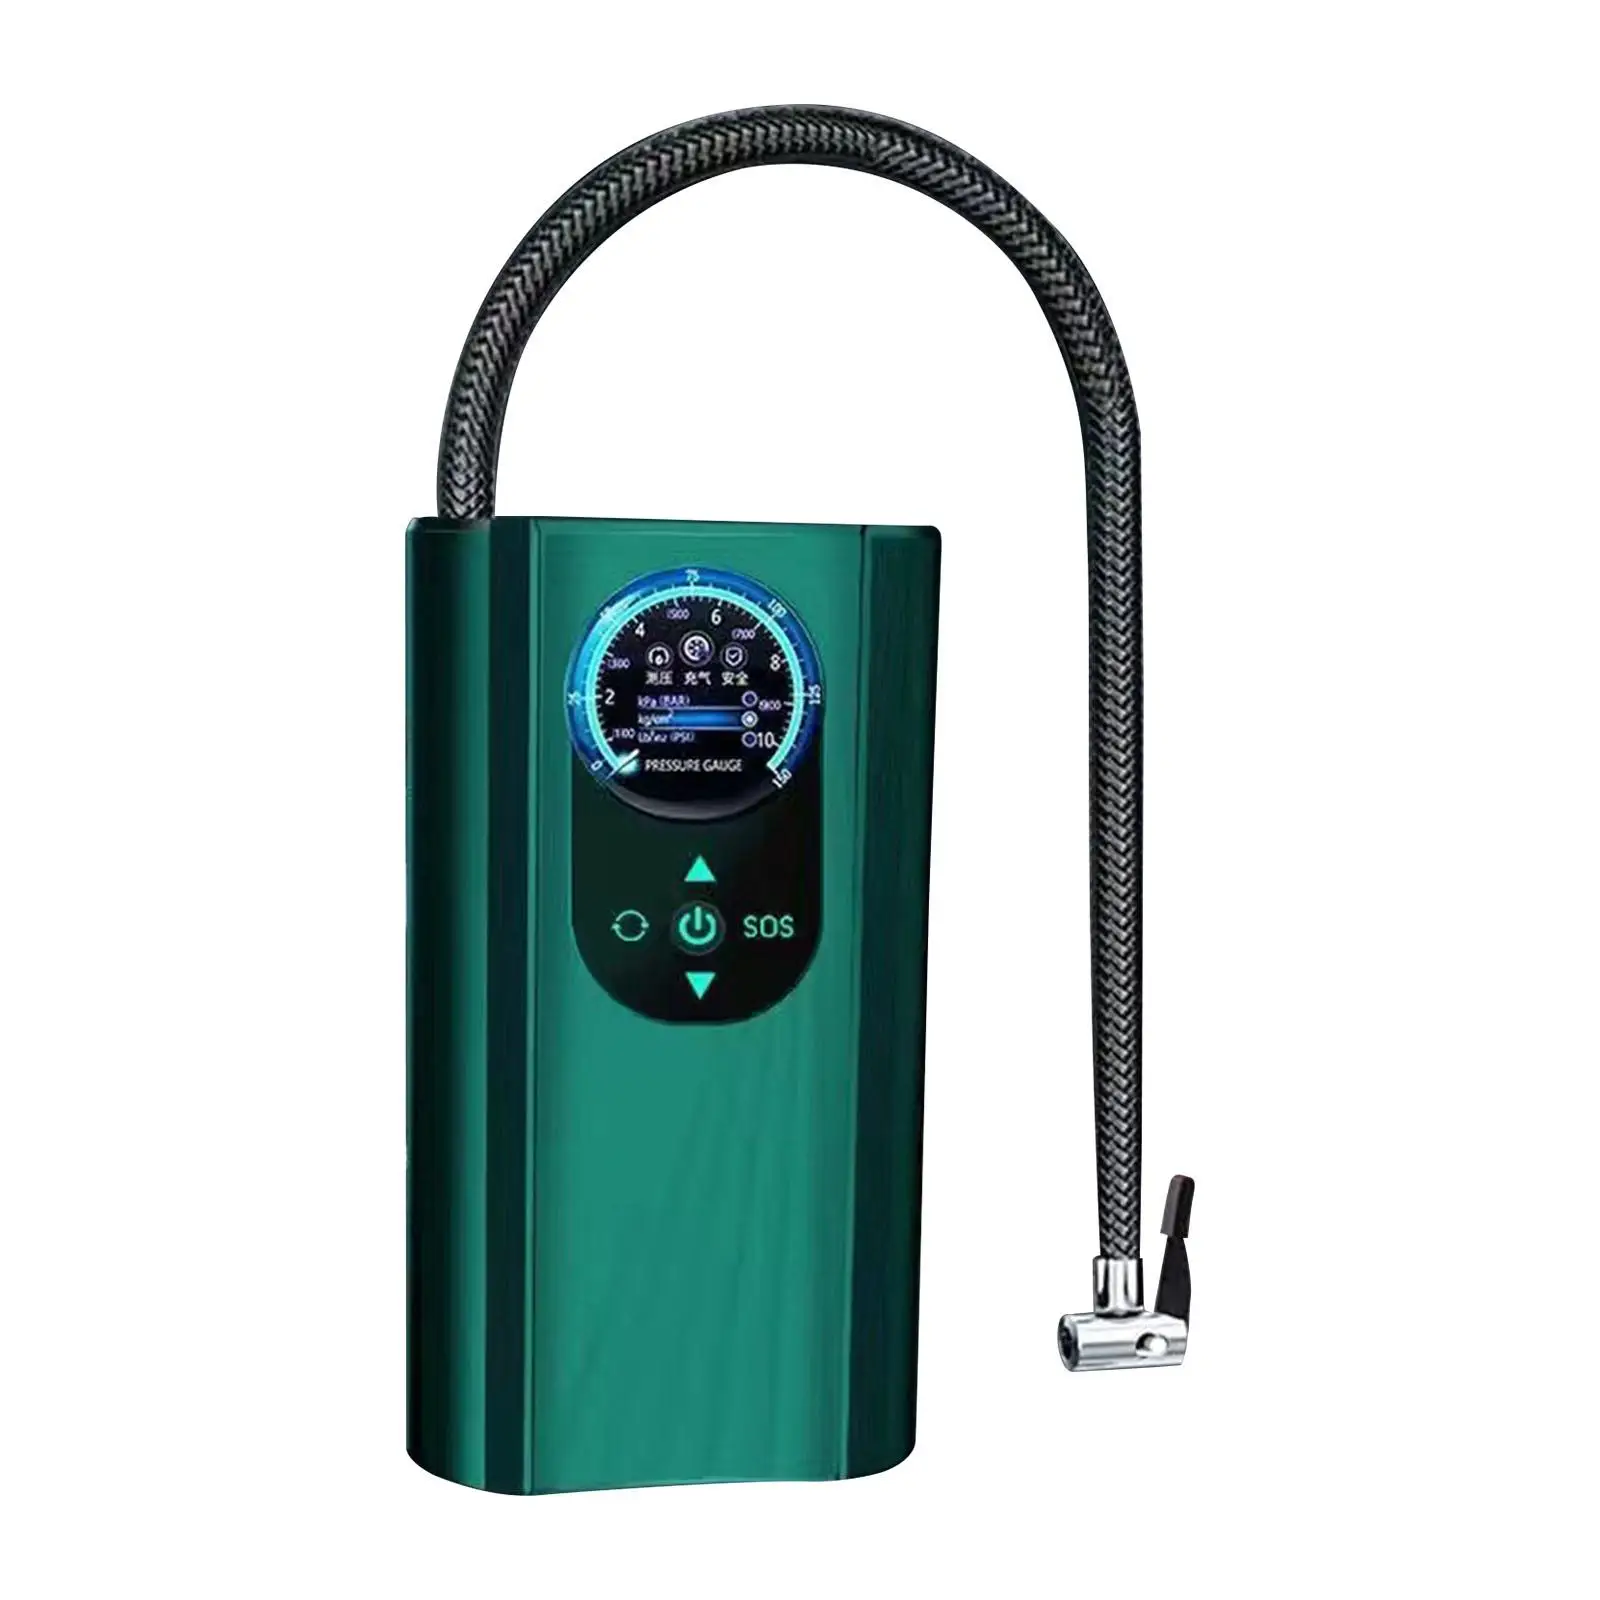 Portable Air Compressor Handheld with Pressure Gauge DC 12V Compact Air Pump Tire Inflator for Bike Car Motorcycle SUV Ball